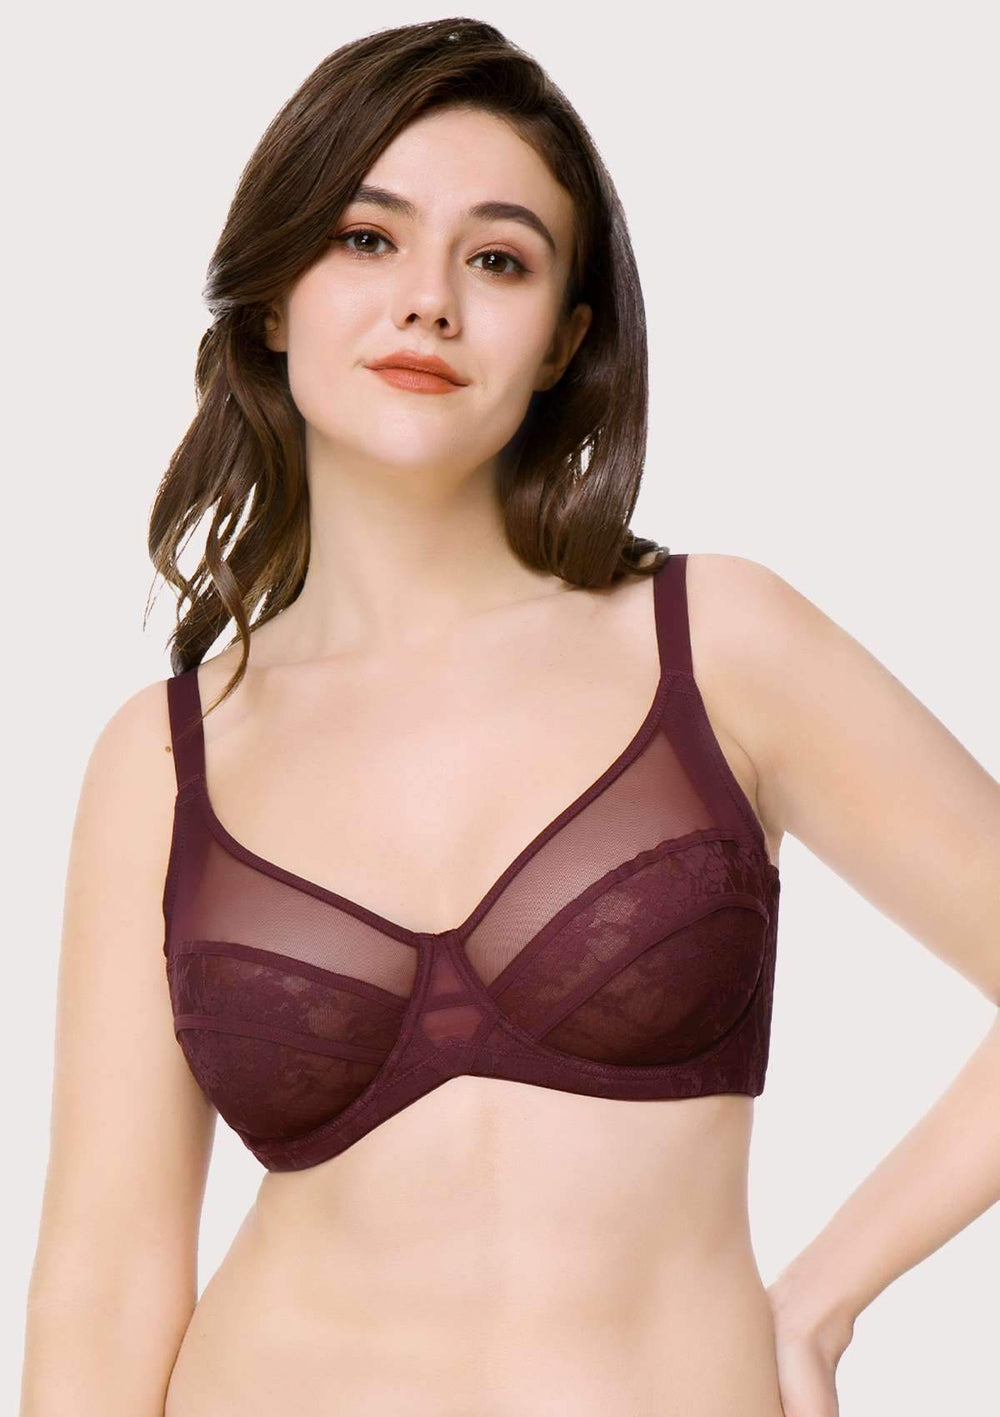 DD+ non paDDed bras - 53 products